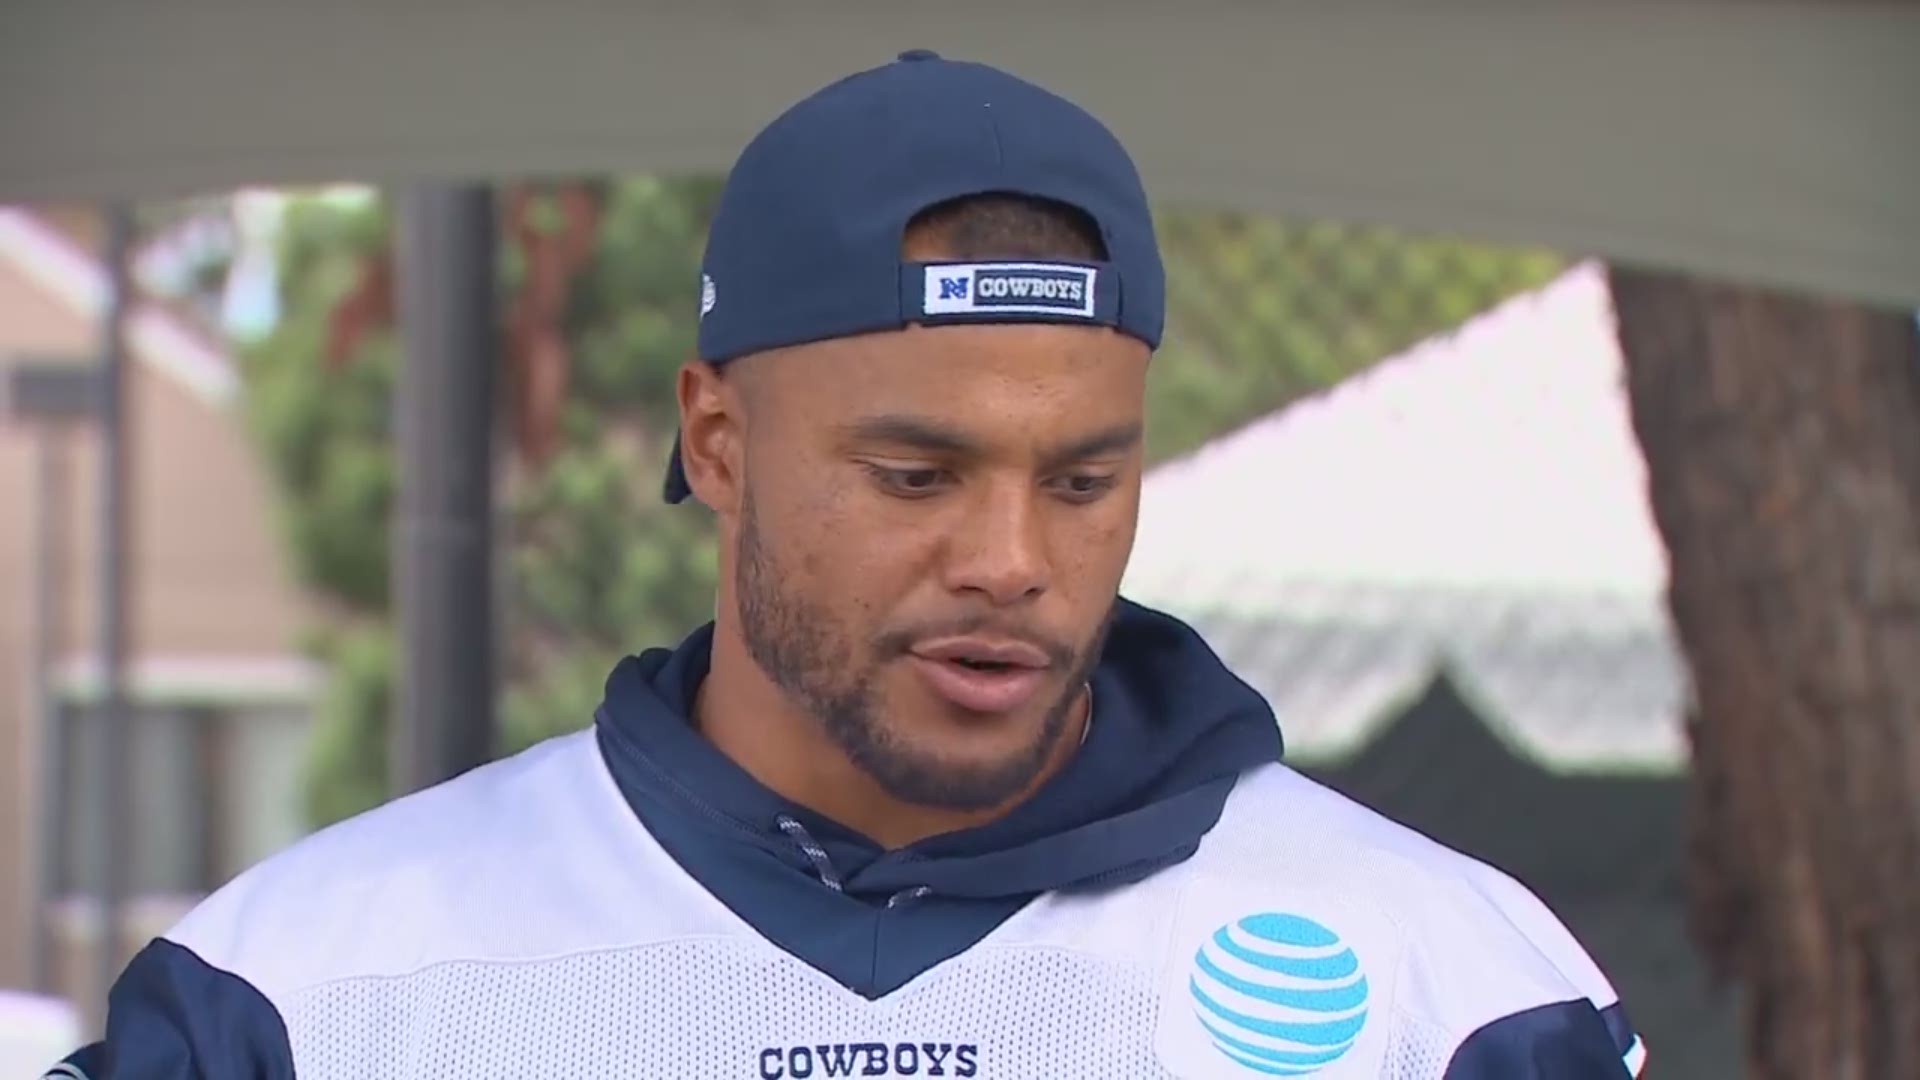 Dak Prescott makes his first public comments since the news of Ezekiel Elliott's six-game suspension. On the same day, Elliott appealed the ban.